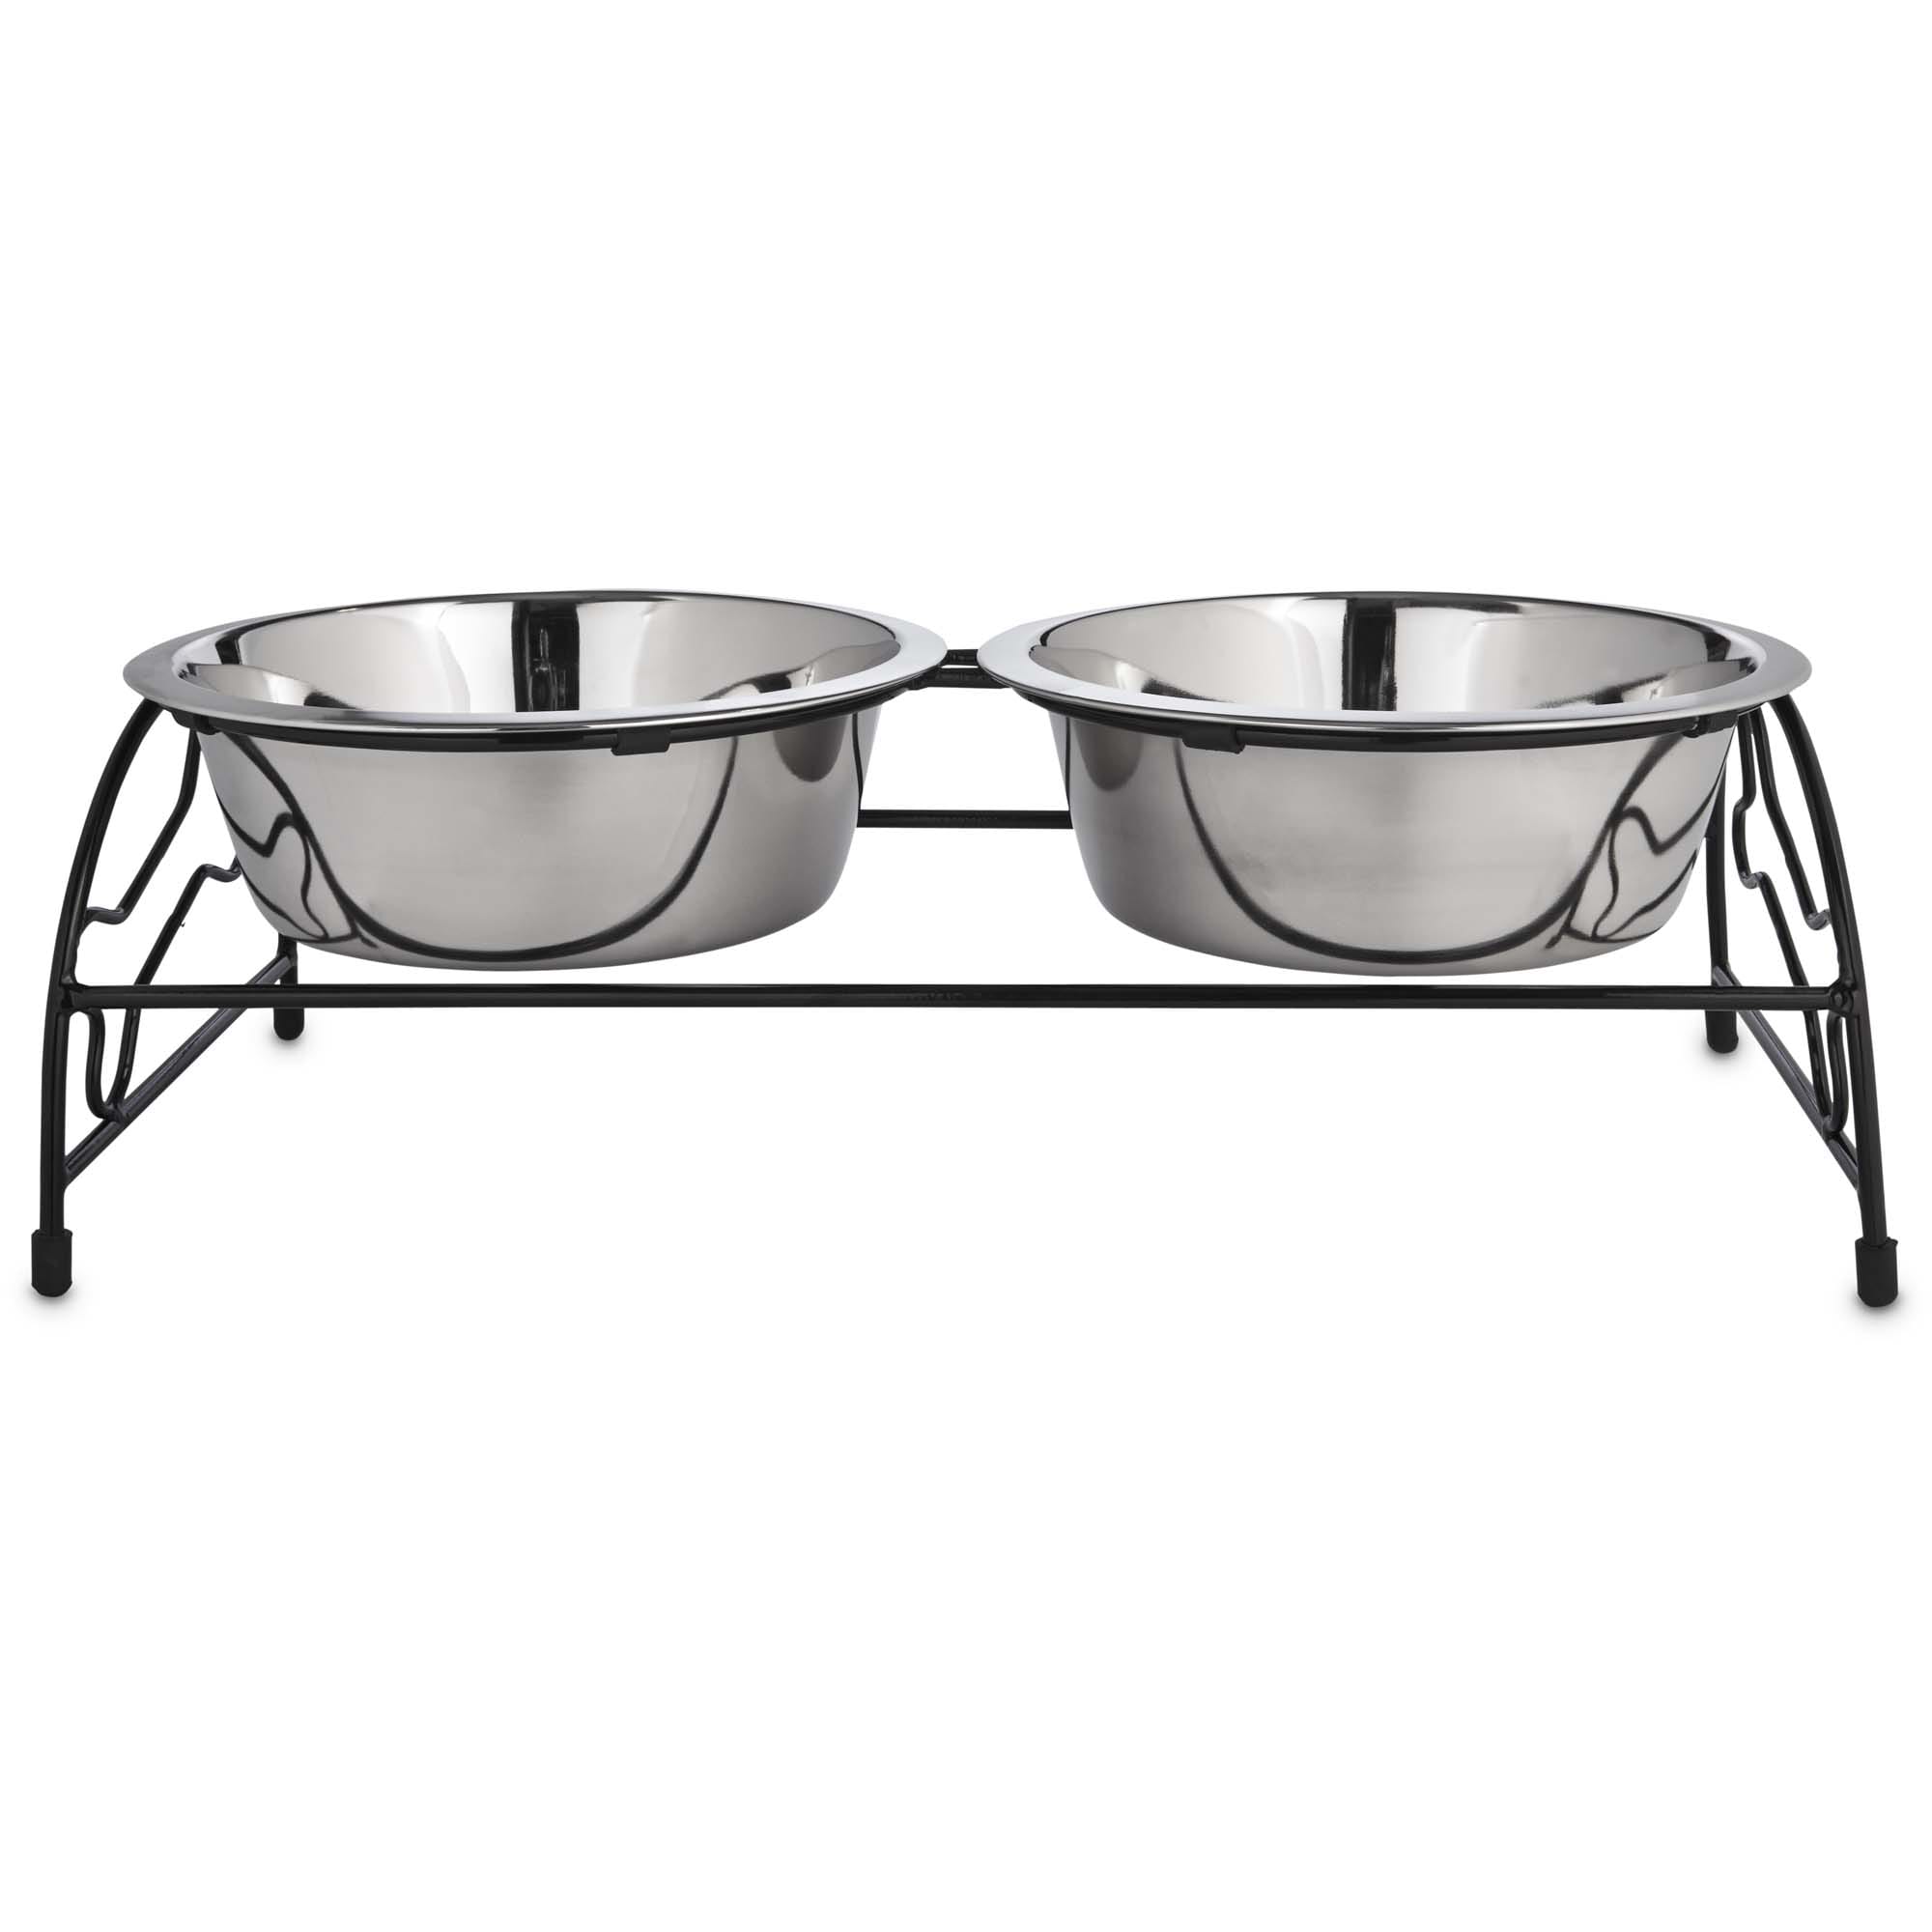 Pet Feeder Stainless Steel Food and Water Bowl with Wire Stand